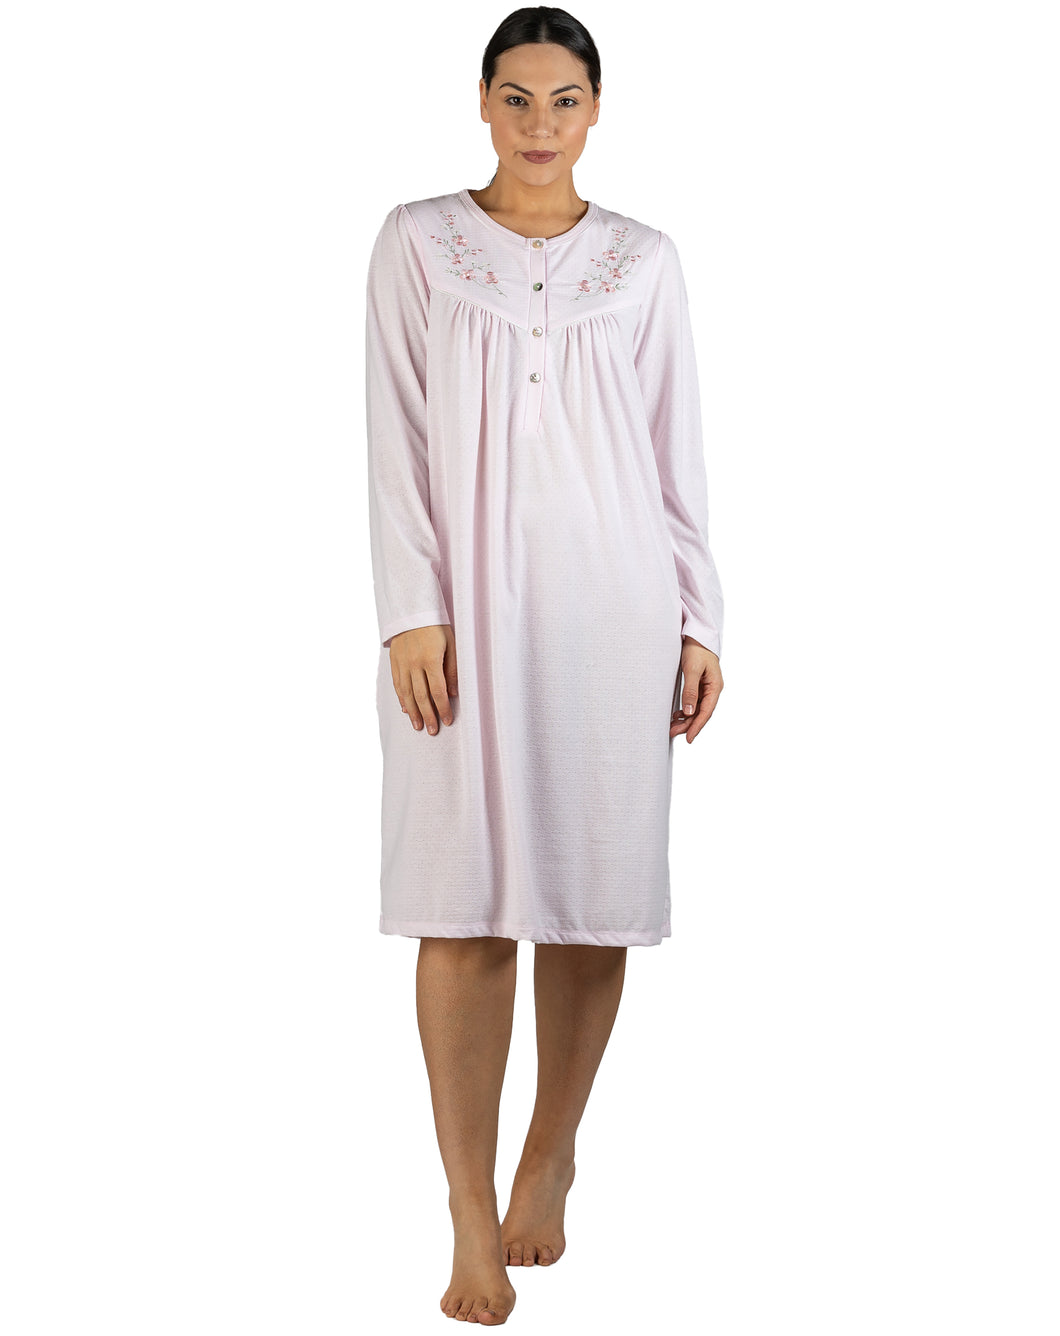 BOUQUET EMBROIDERY NIGHTIE PINK - SK237E